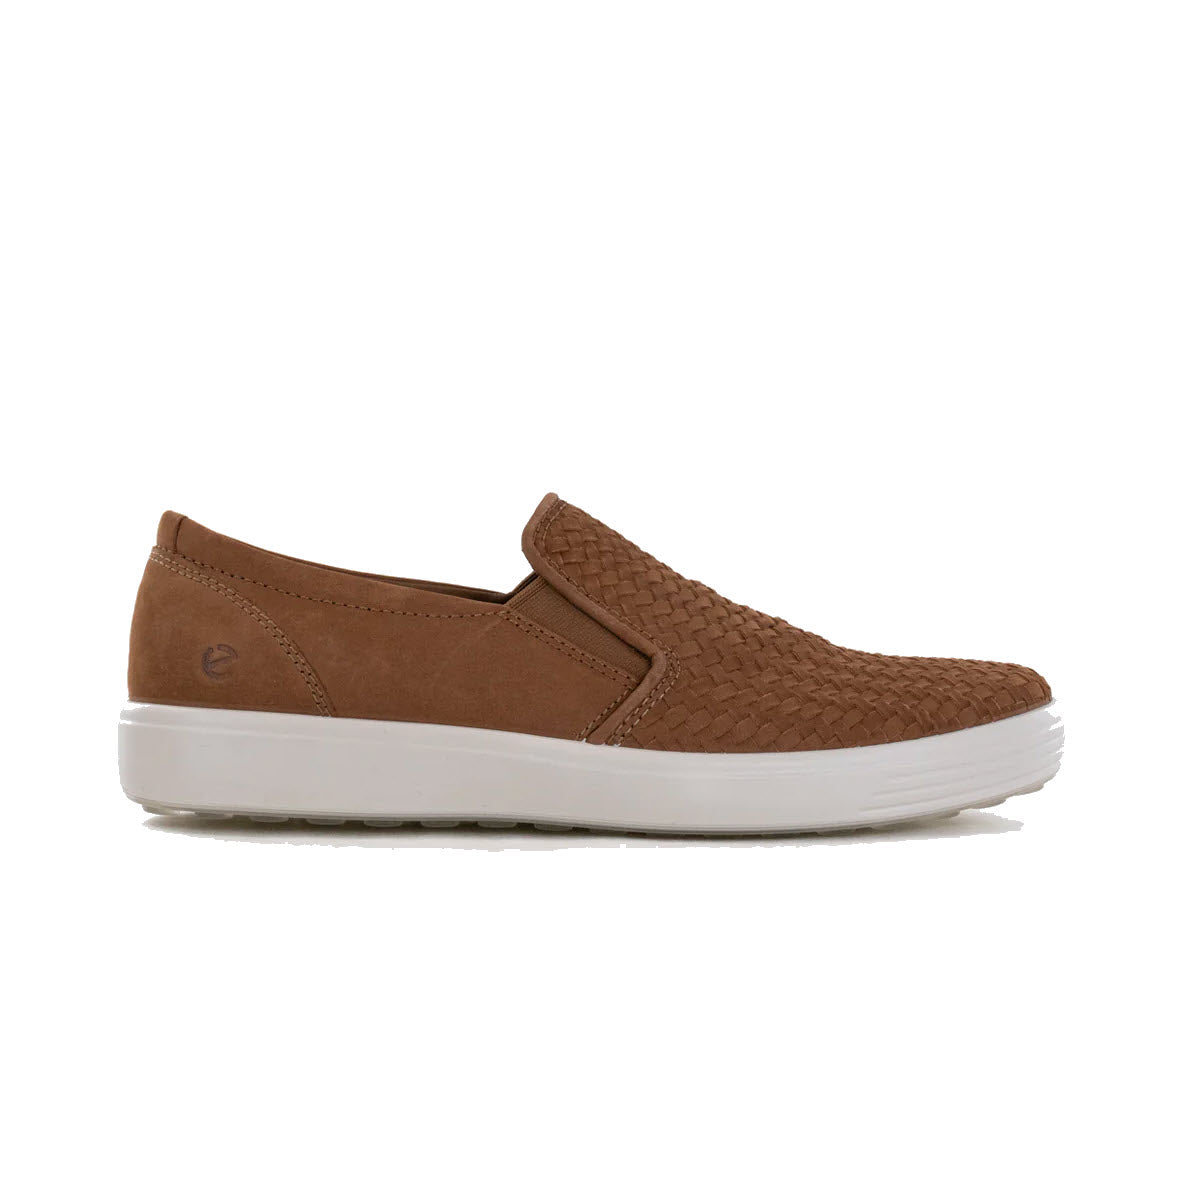 Side view of a brown, woven Ecco Soft 7 slip-on sneaker with a white sole and a small logo on the side.